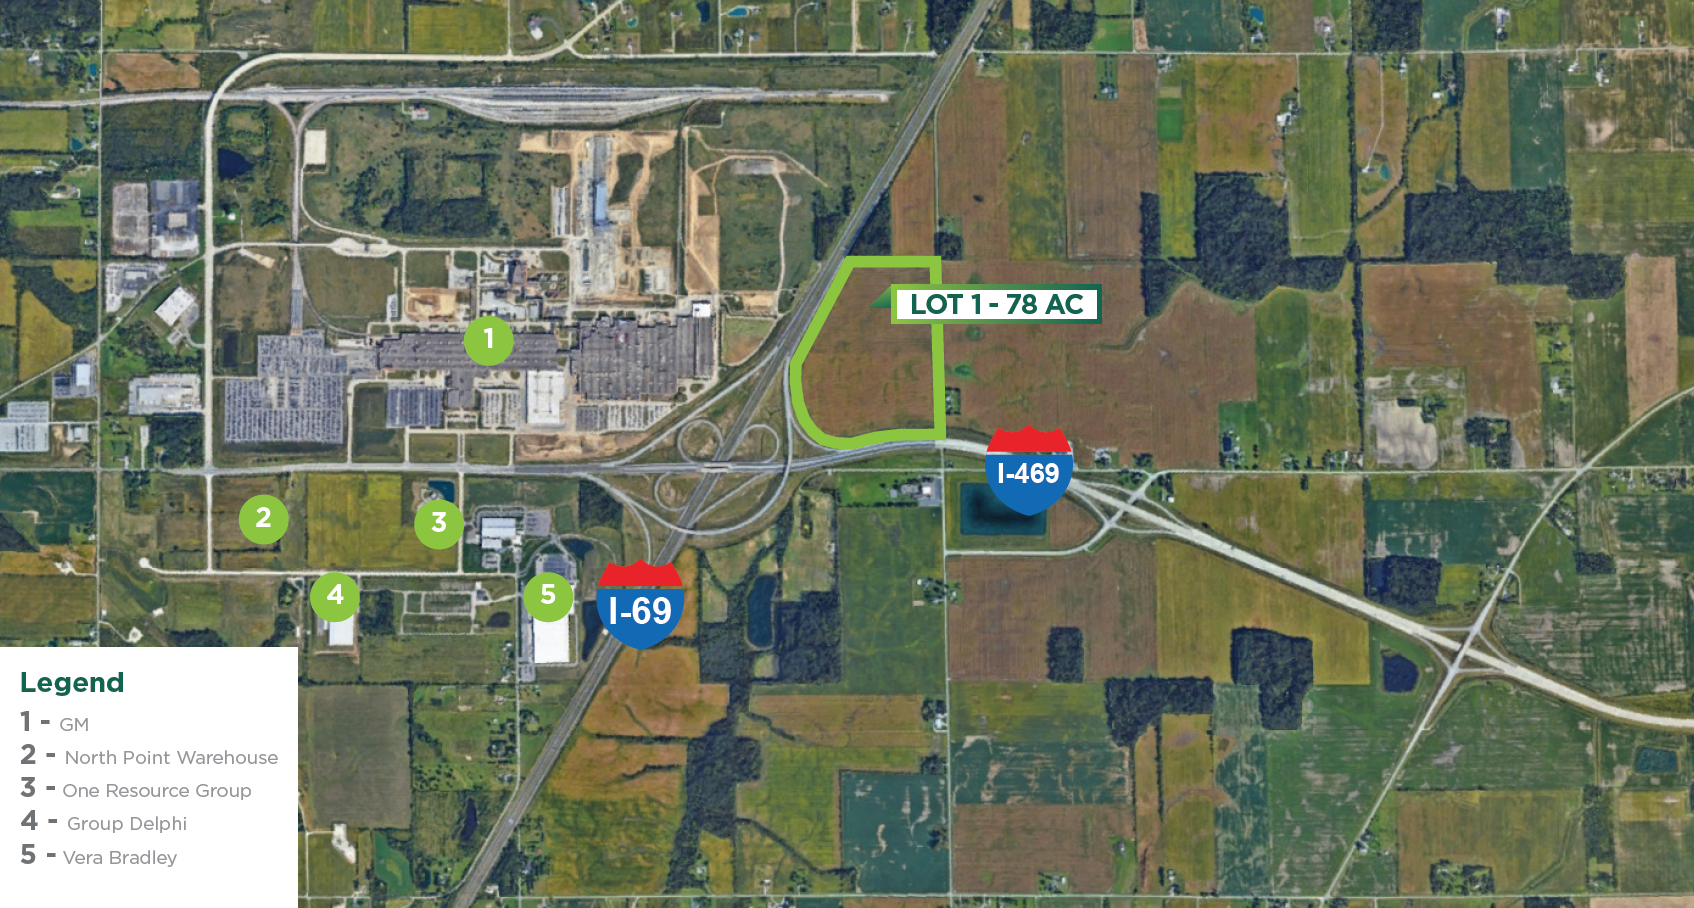 Sturges Property Group, Lafayette Center Road and Feighner Road Land off I-69 and I-469